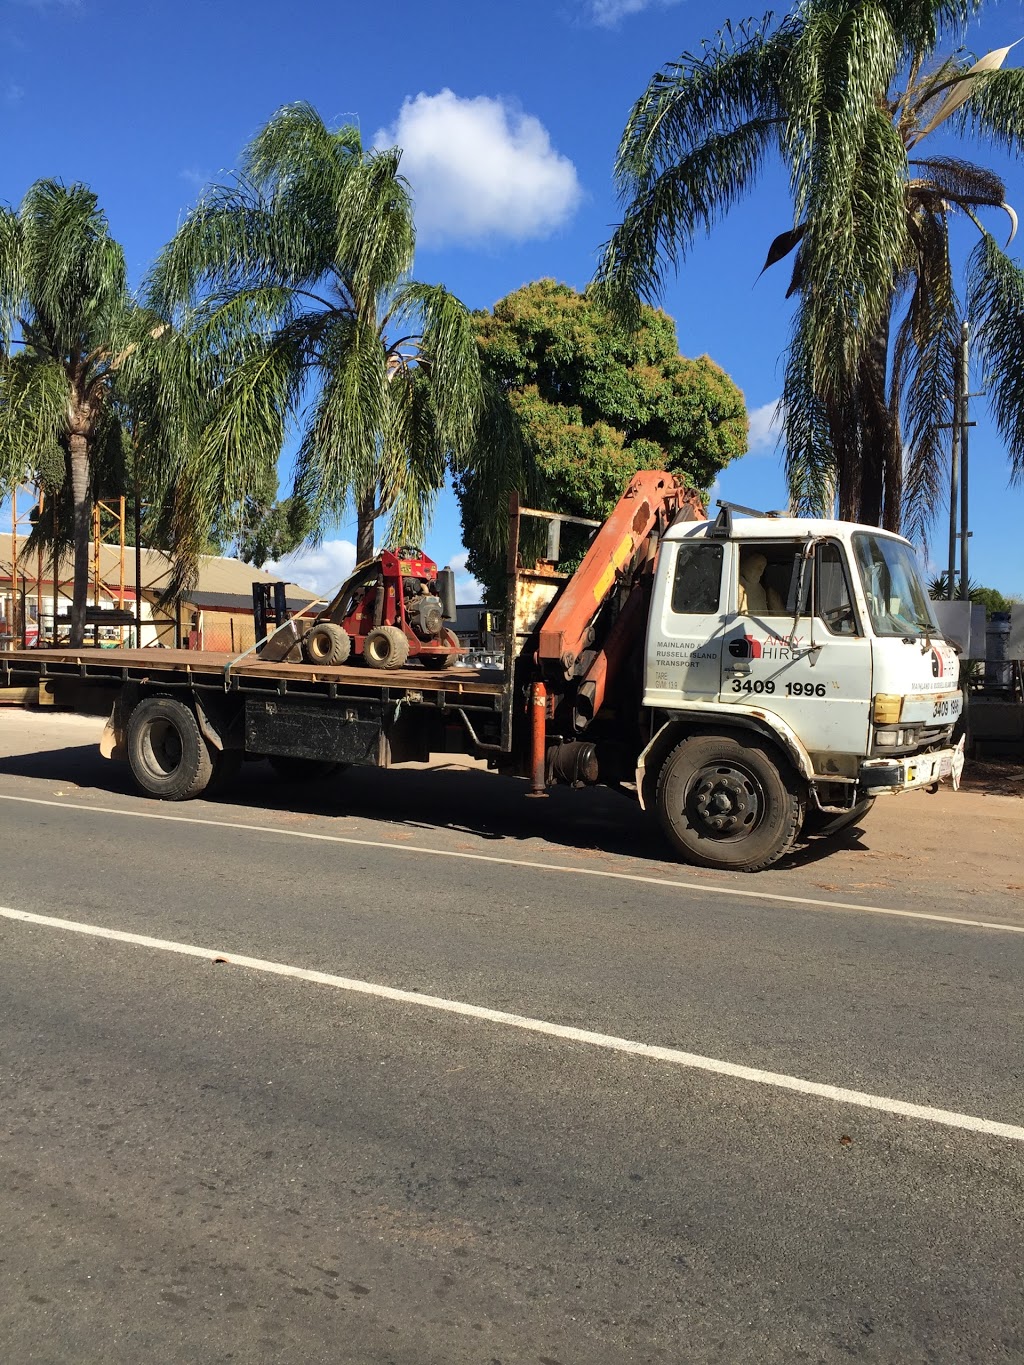 Andy Hire | 81/83 High St, Russell Island QLD 4184, Australia | Phone: (07) 3409 1996